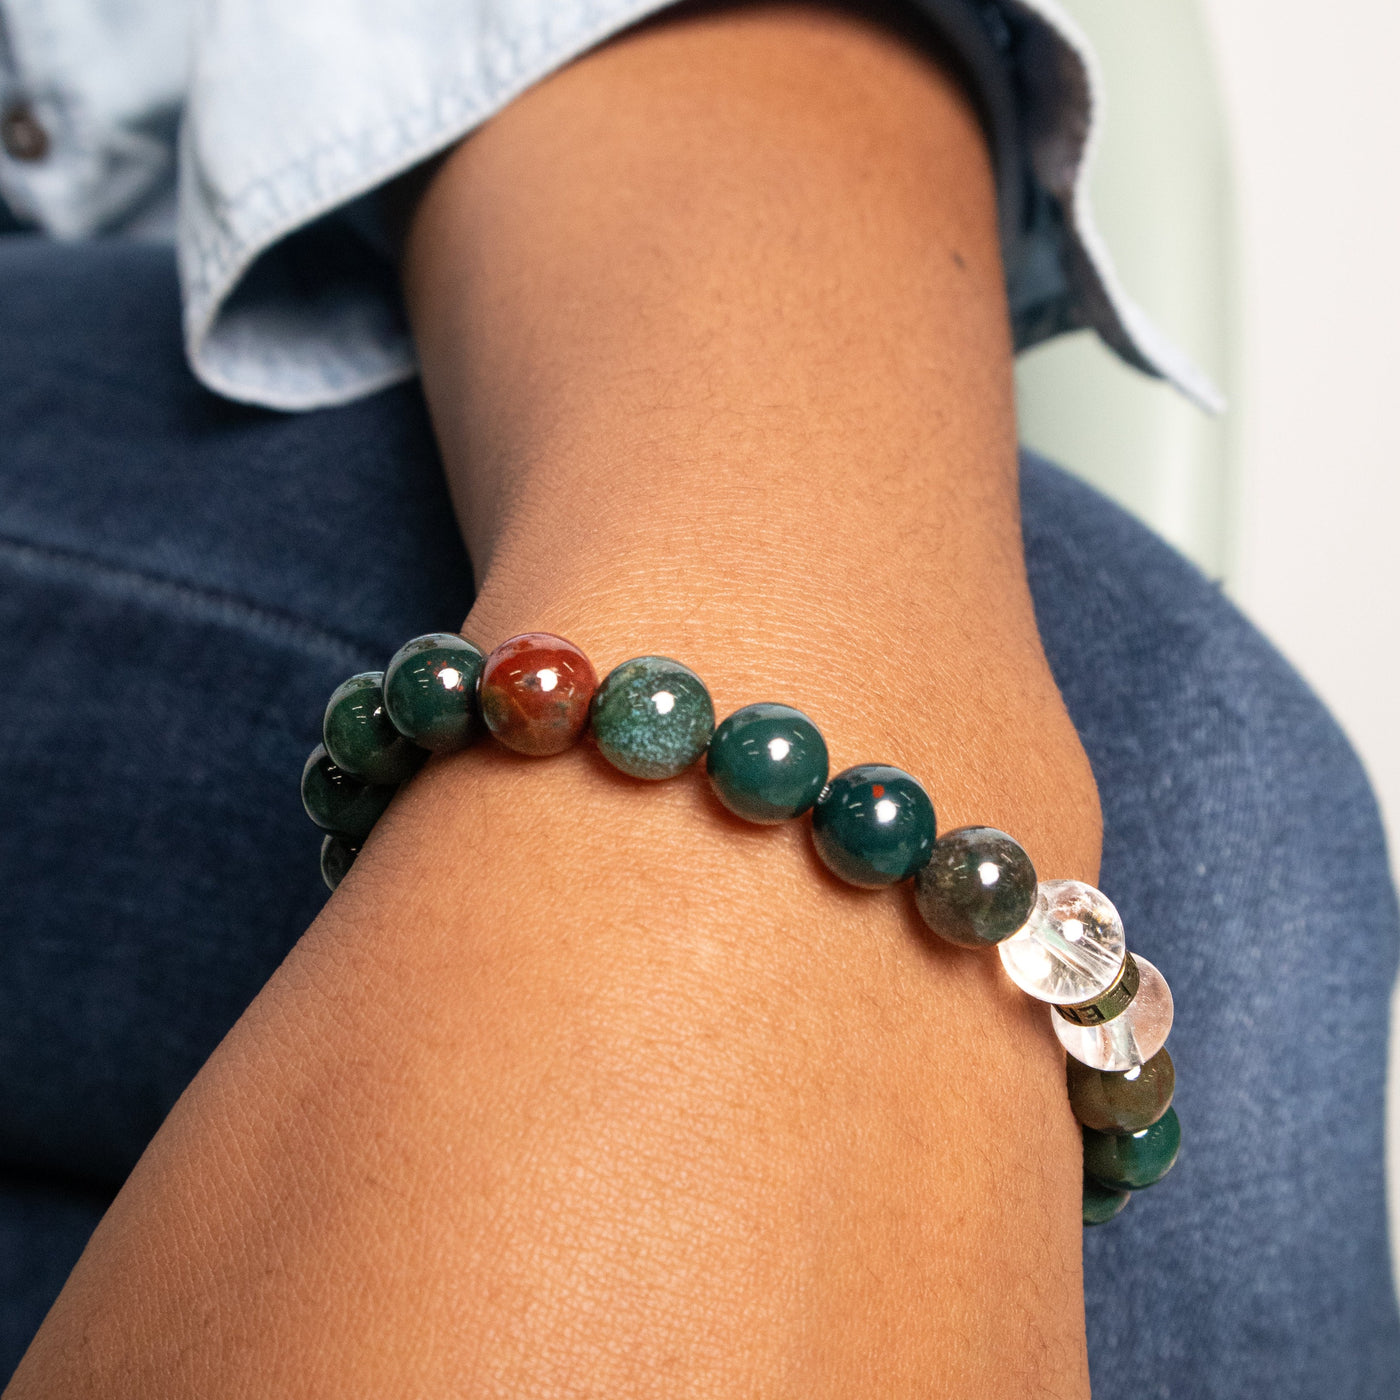 Detailed close-up view of genuine Bloodstone bracelet by Energy Muse as worn on a young biracial woman 